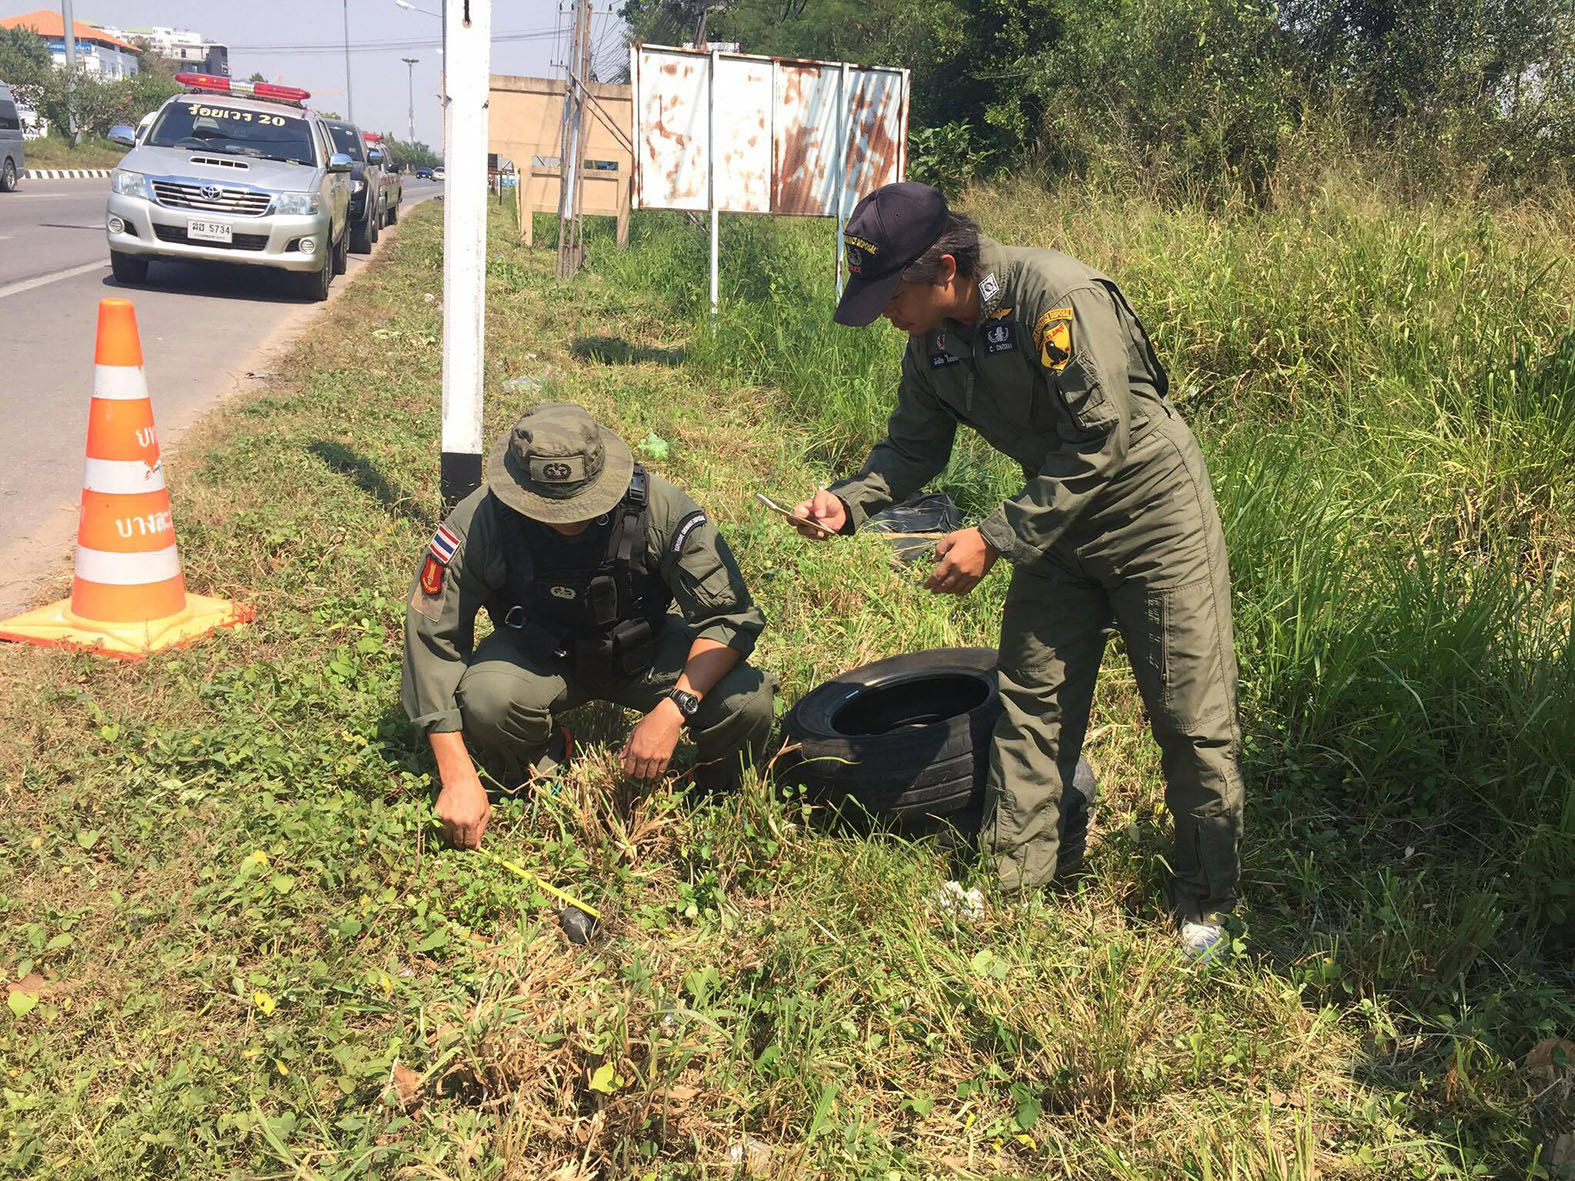 Bomb squad police begin the process of defusing an IED found on a Sattahip roadside.